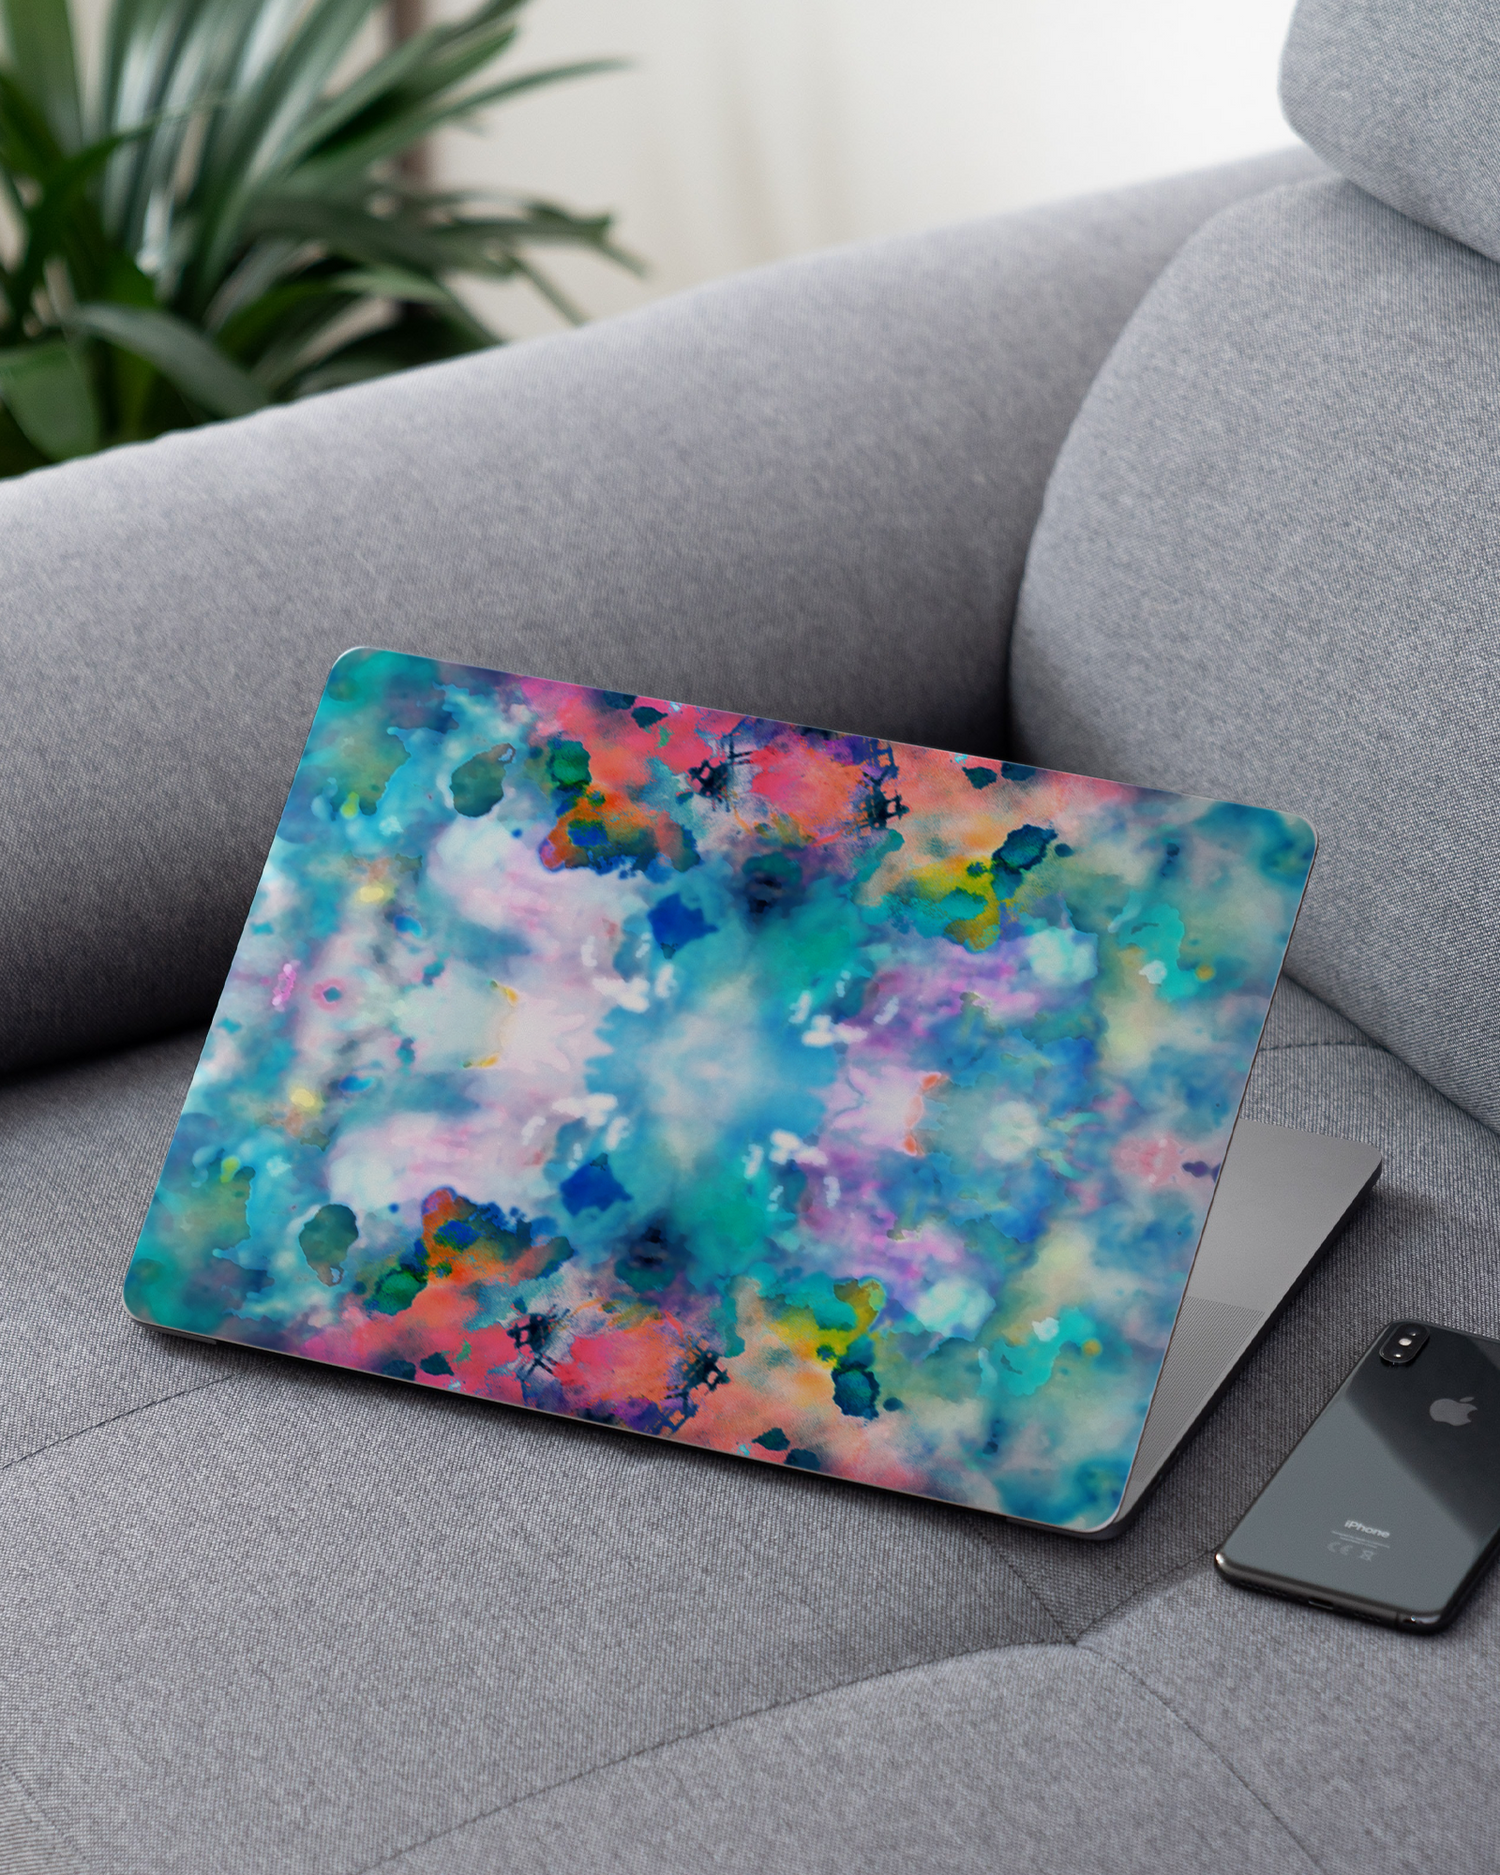 Paint Splatter Laptop Skin for 13 inch Apple MacBooks on a couch